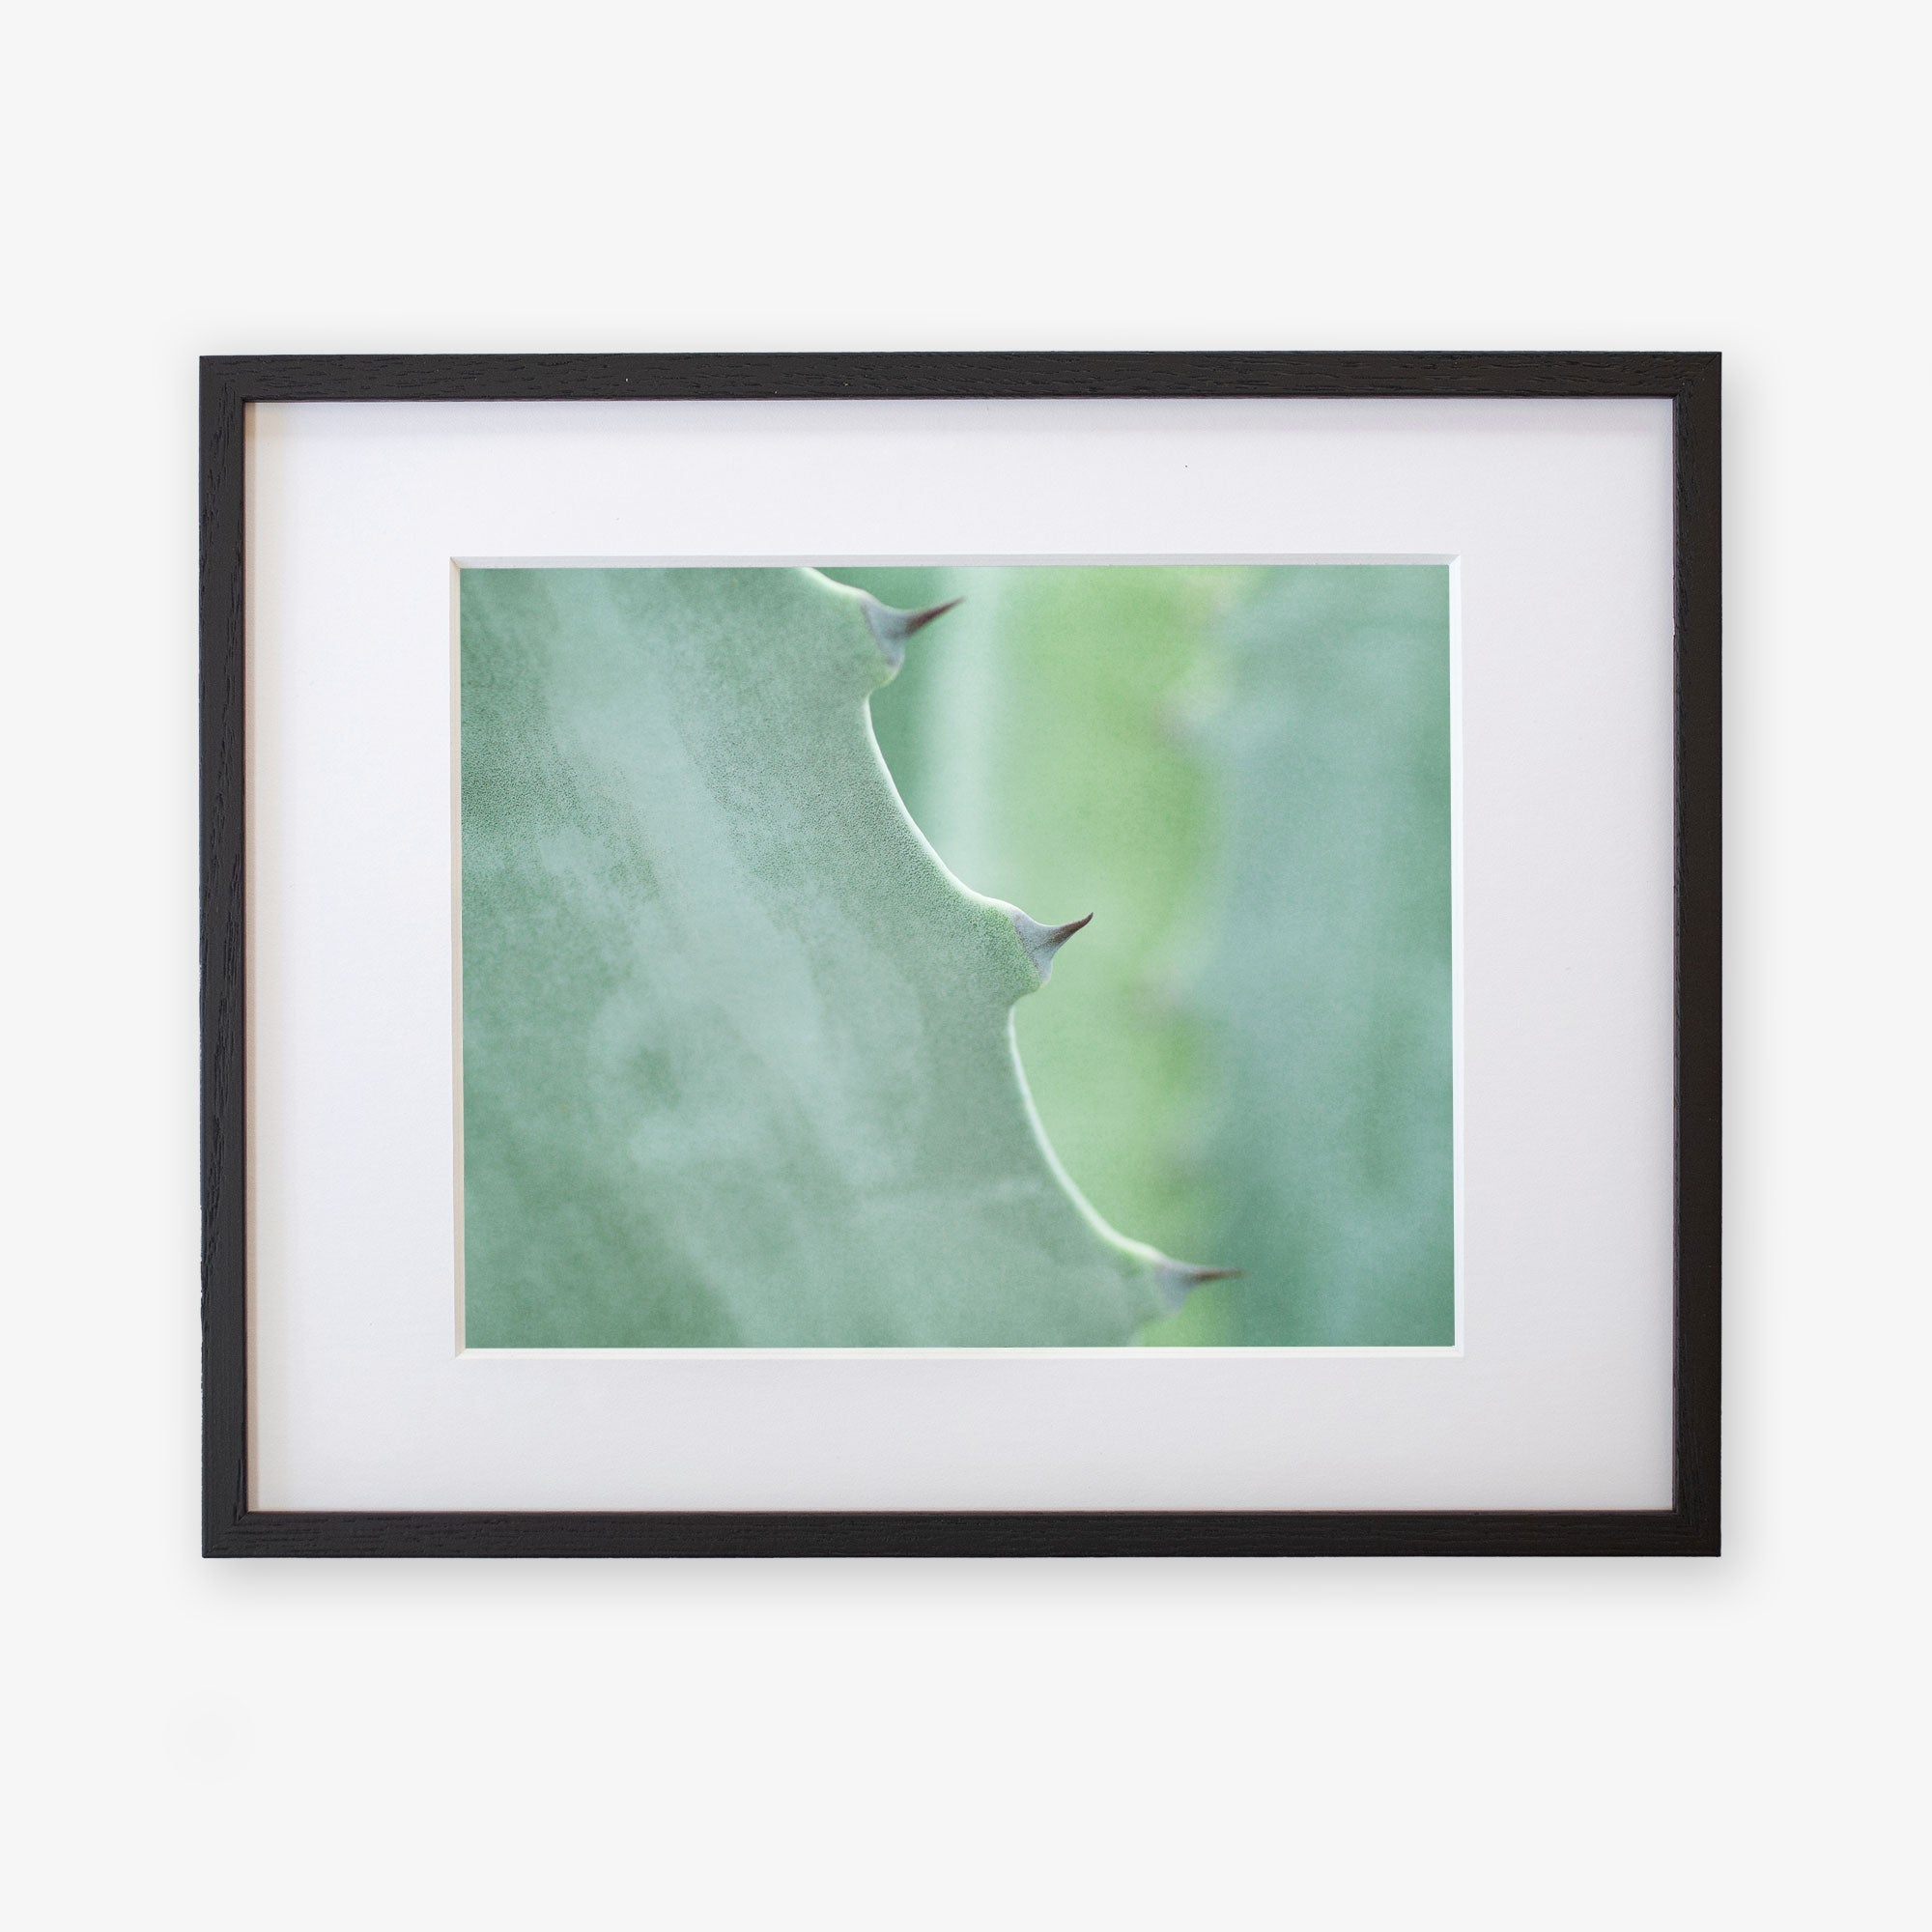 A close-up photograph of a Mint Green Botanical Print, &#39;Aloe Vera Spikes&#39; by Offley Green, printed on archival photographic paper, against a white background.